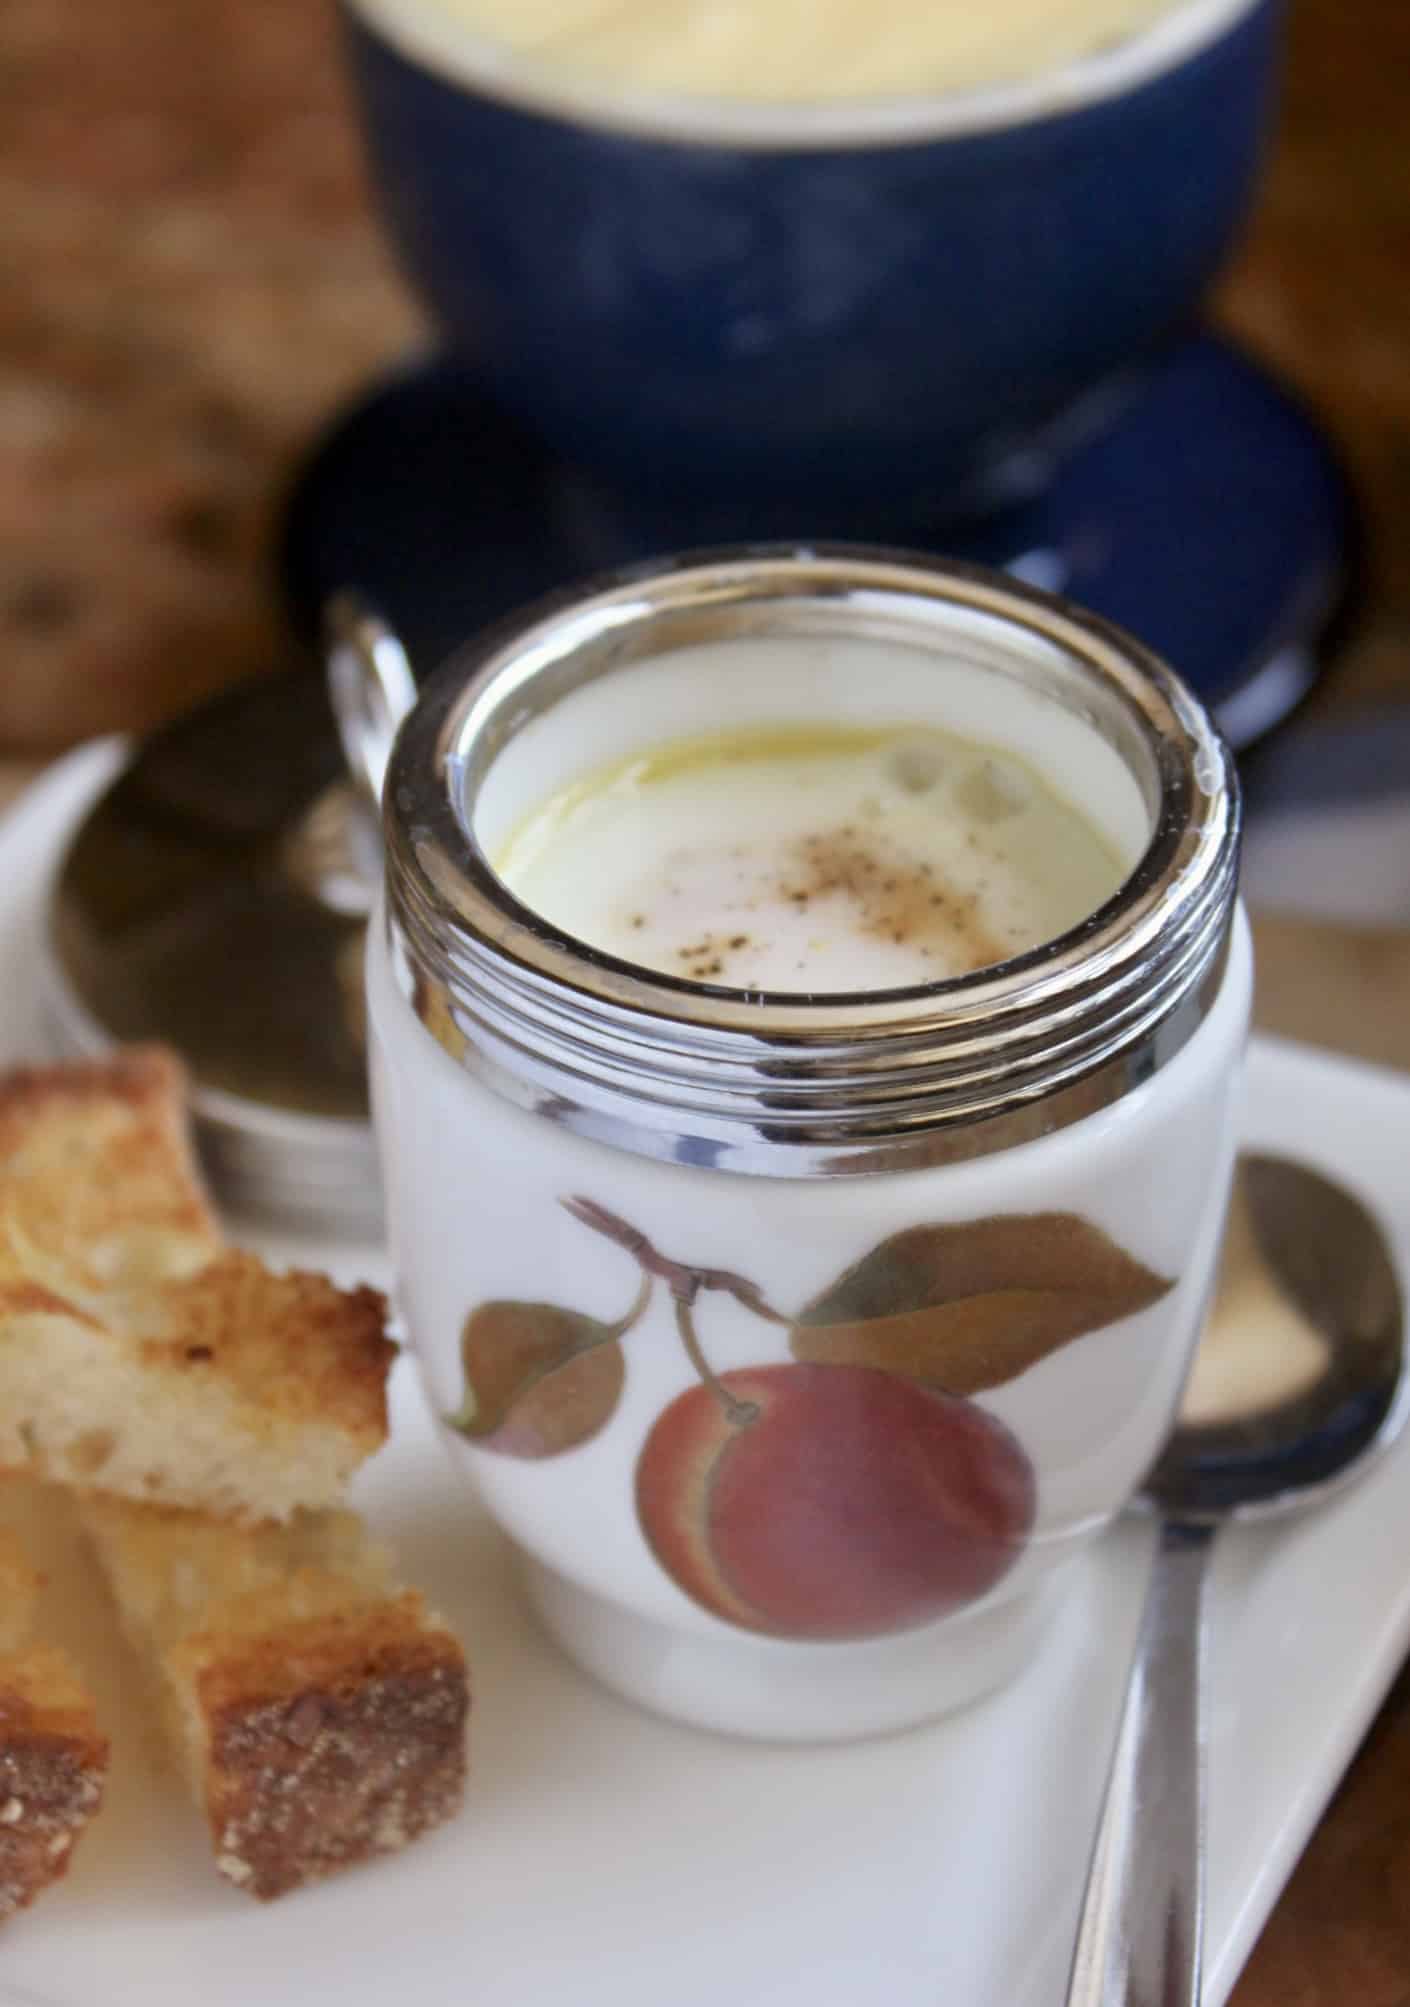 Coddled Eggs (How to Coddle Eggs - Easy Directions) - Christina's